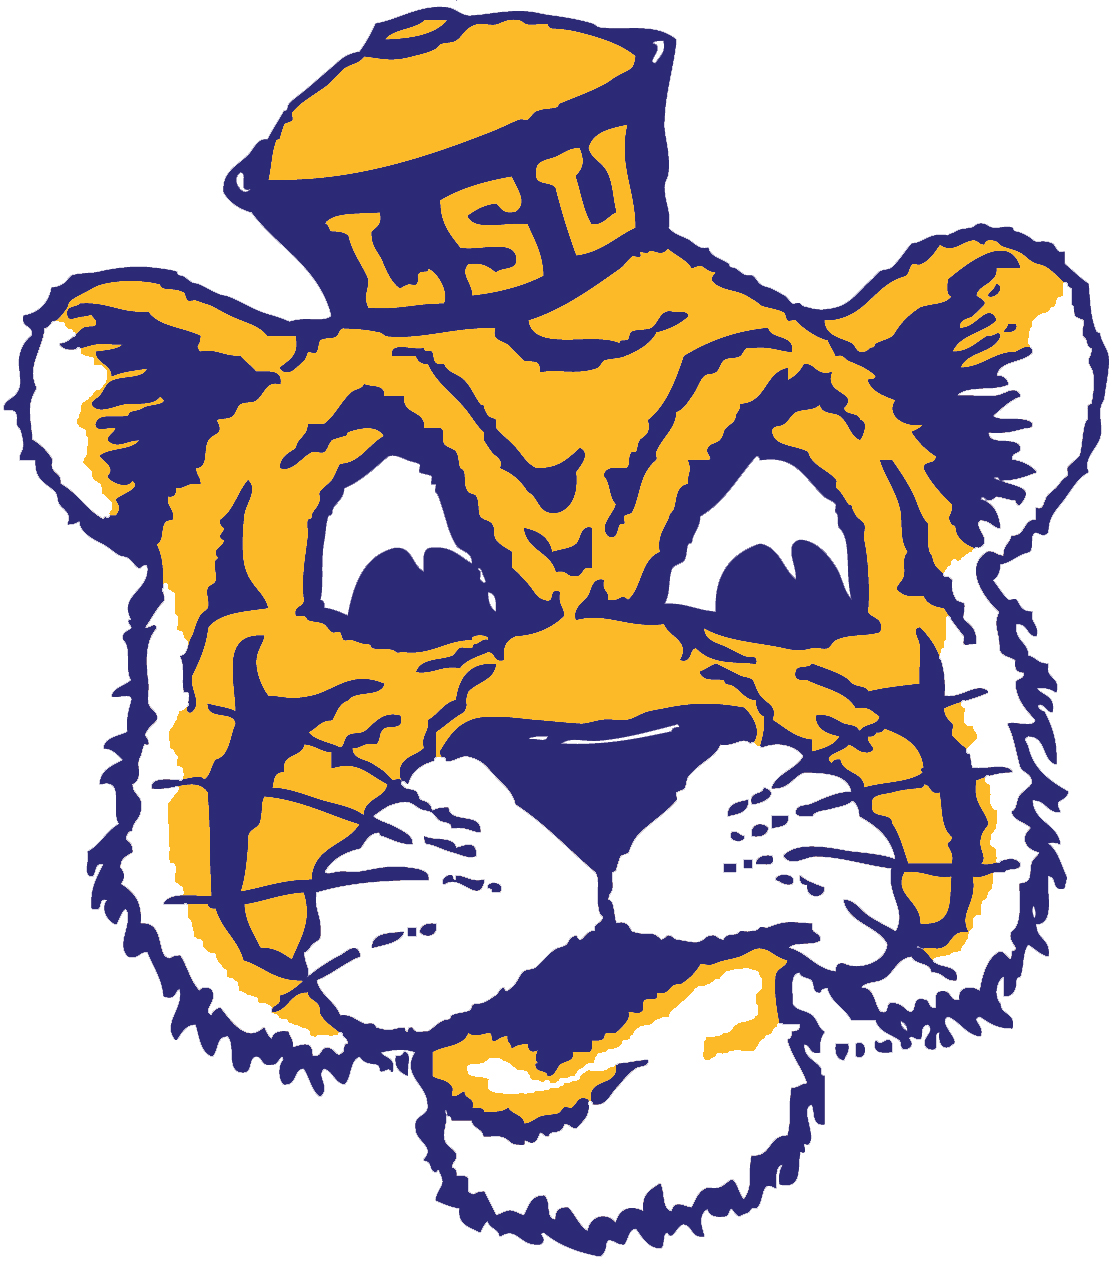 Lsu tigers clipart 4 » Clipart Station.